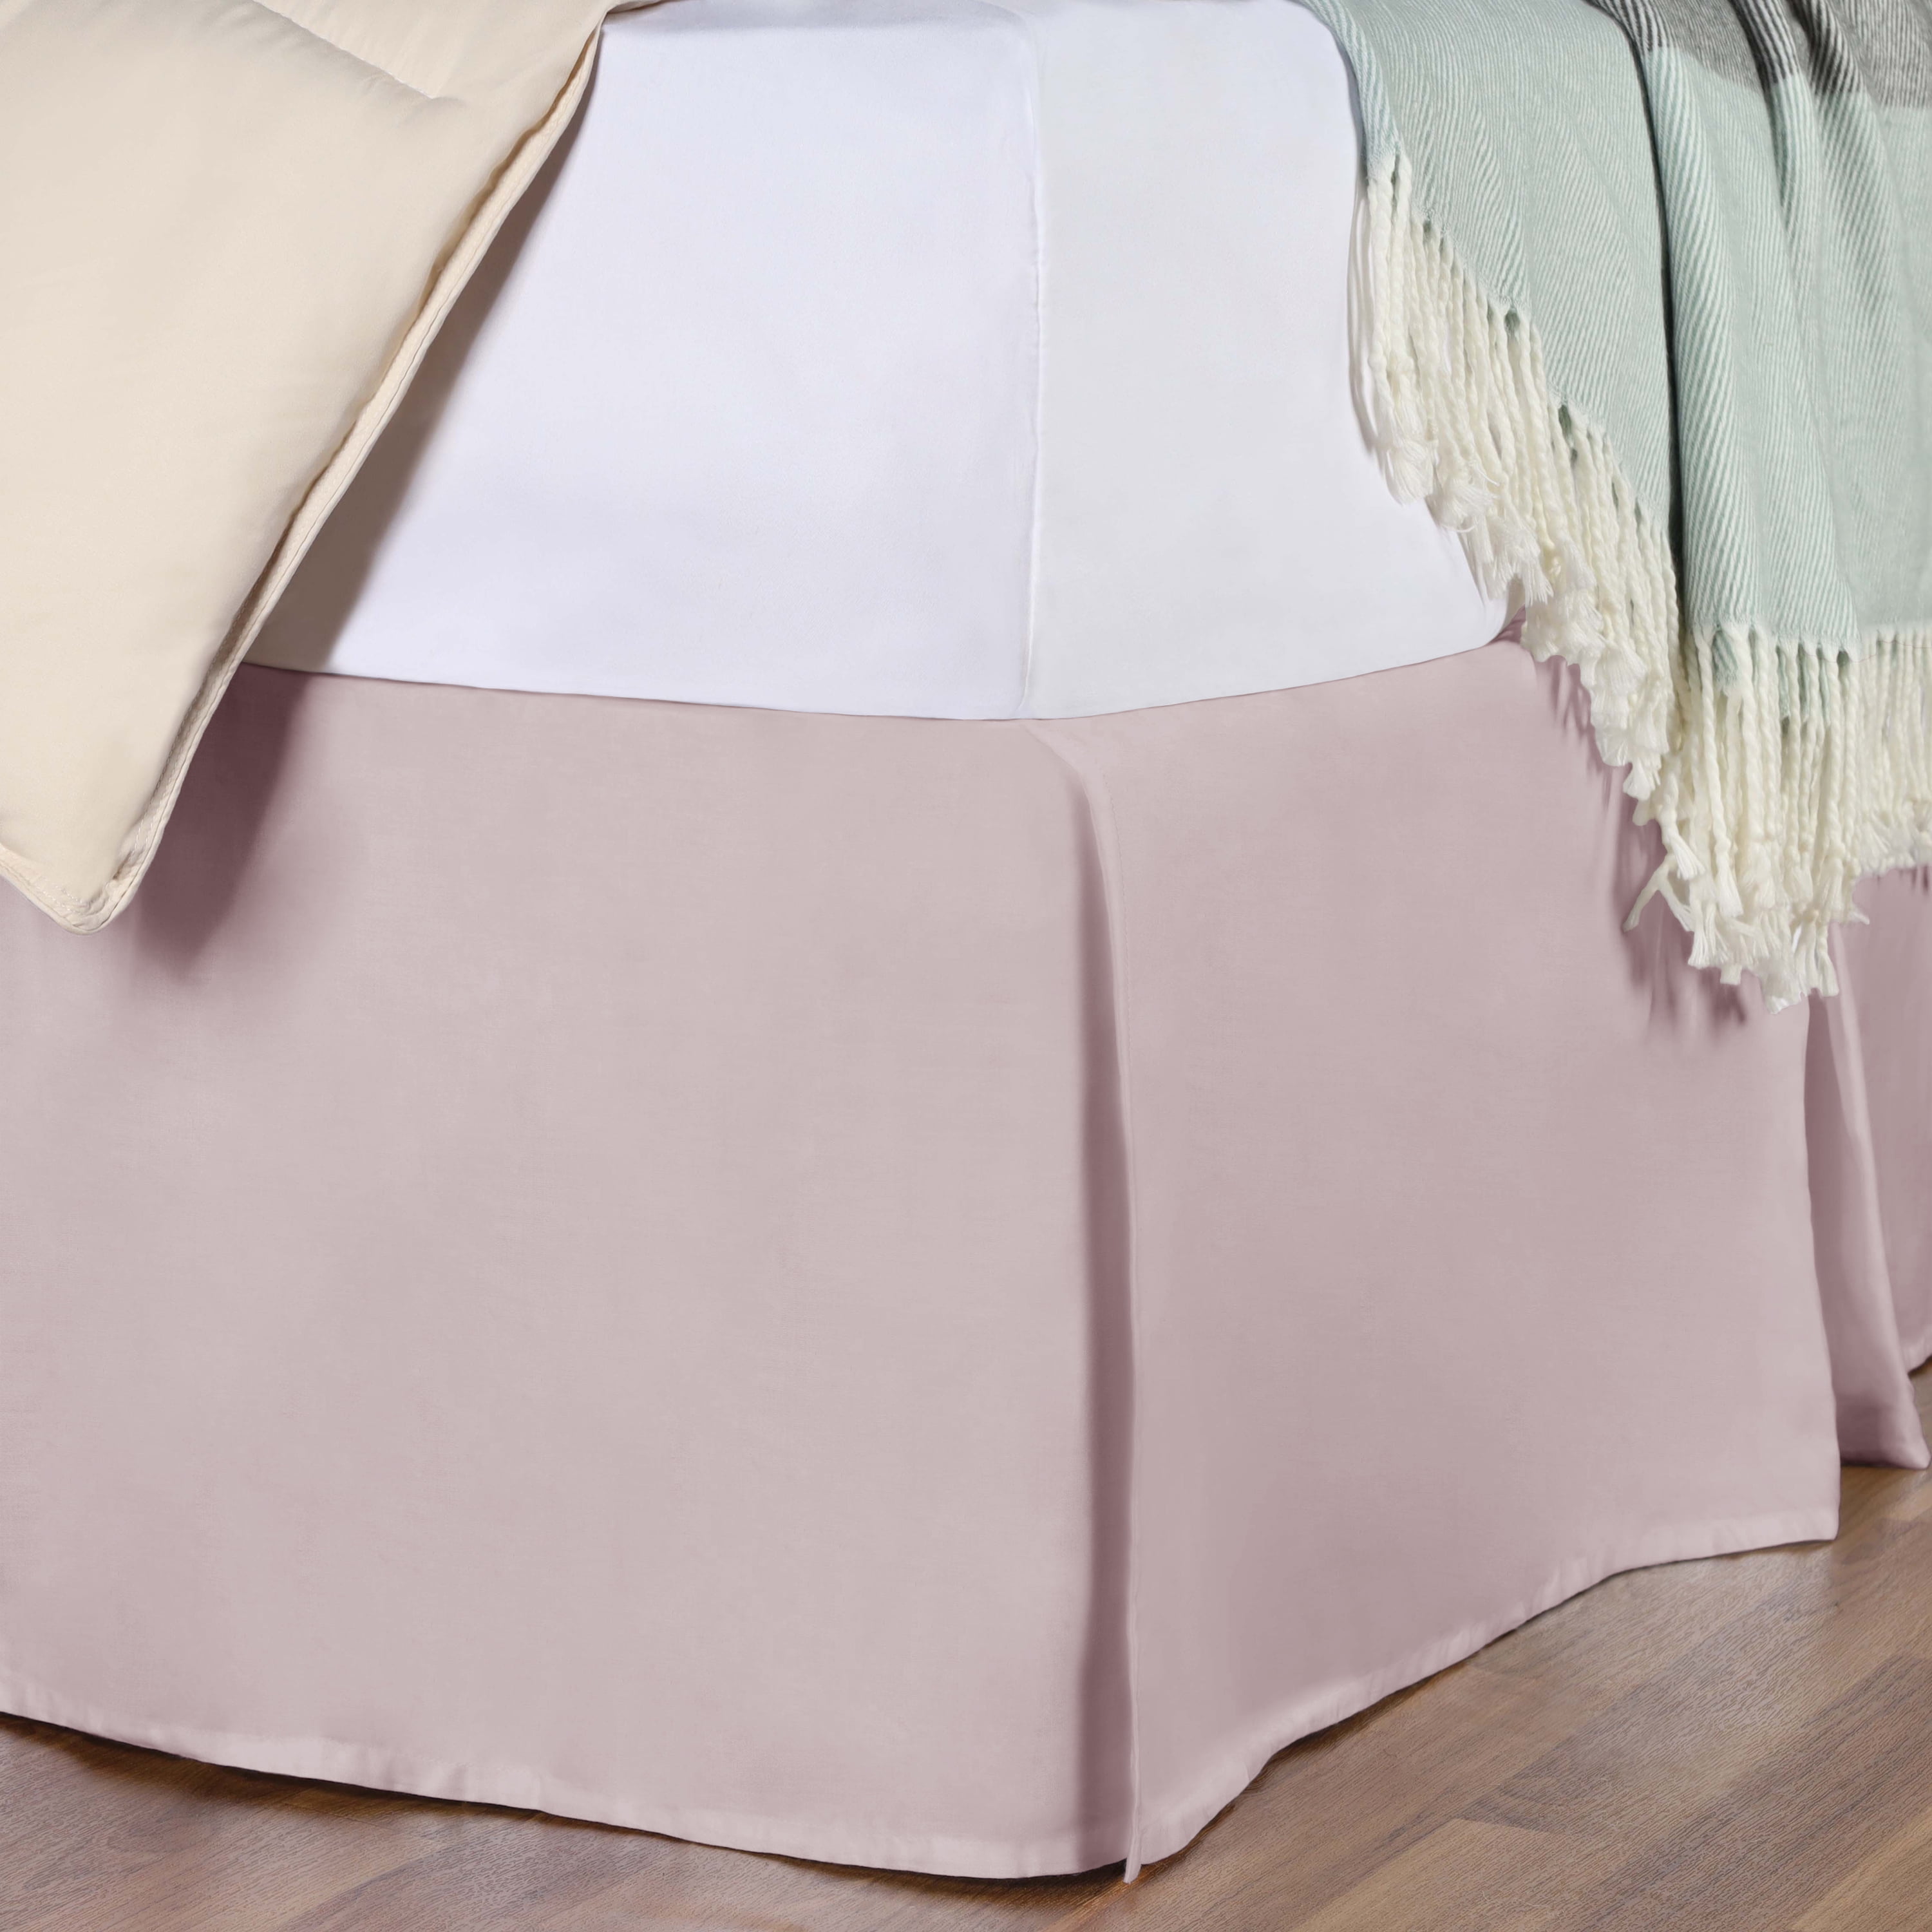 Details about   Extra Deep Pocket 1 PC Bed Skirt 1000tc Egyptian Cotton All Color King Size 